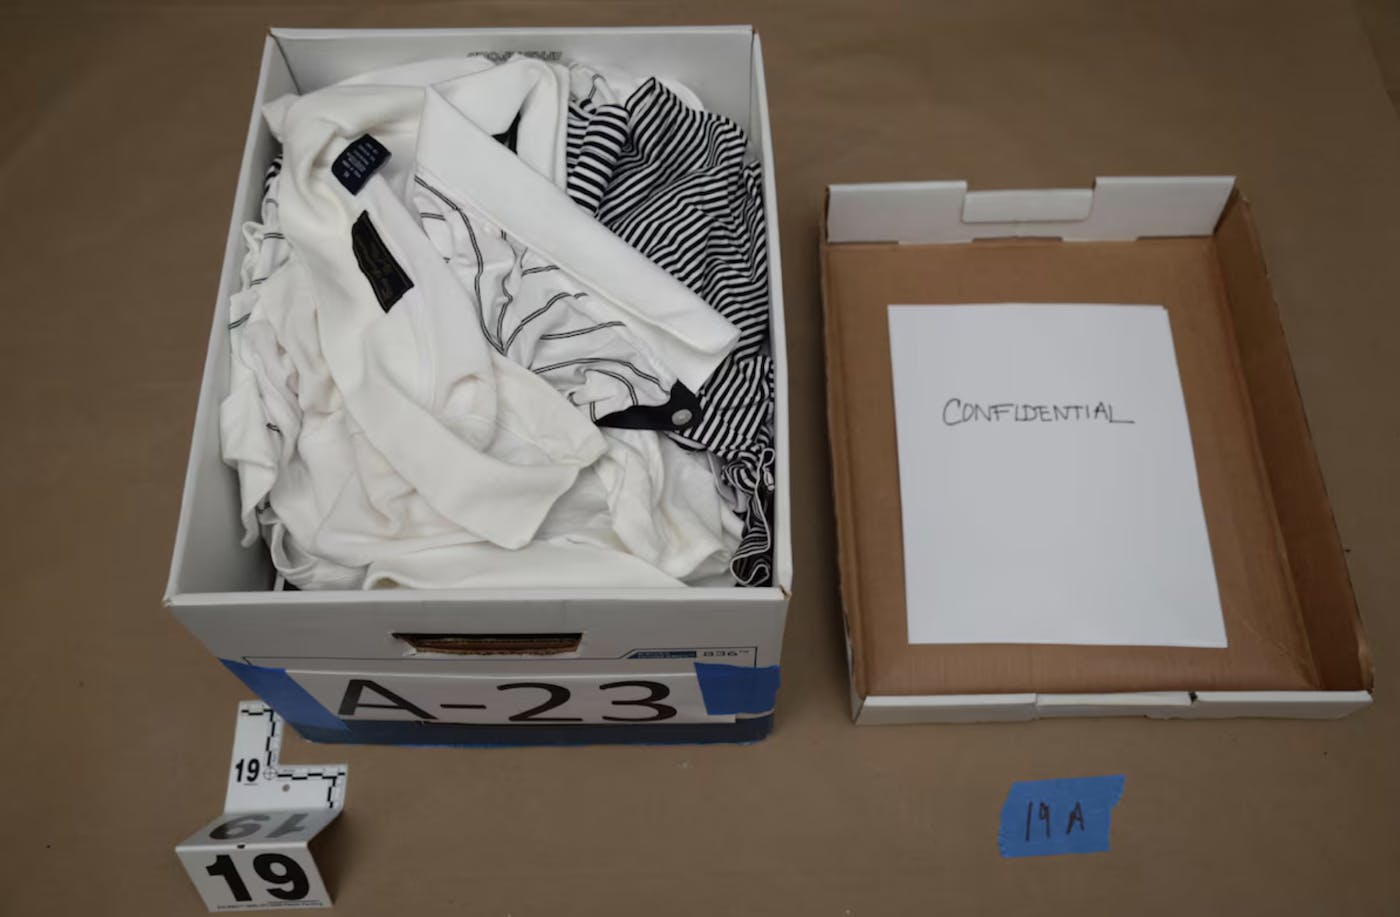 A box with golf shirts and a piece of paper that reads "CONFIDENTIAL"